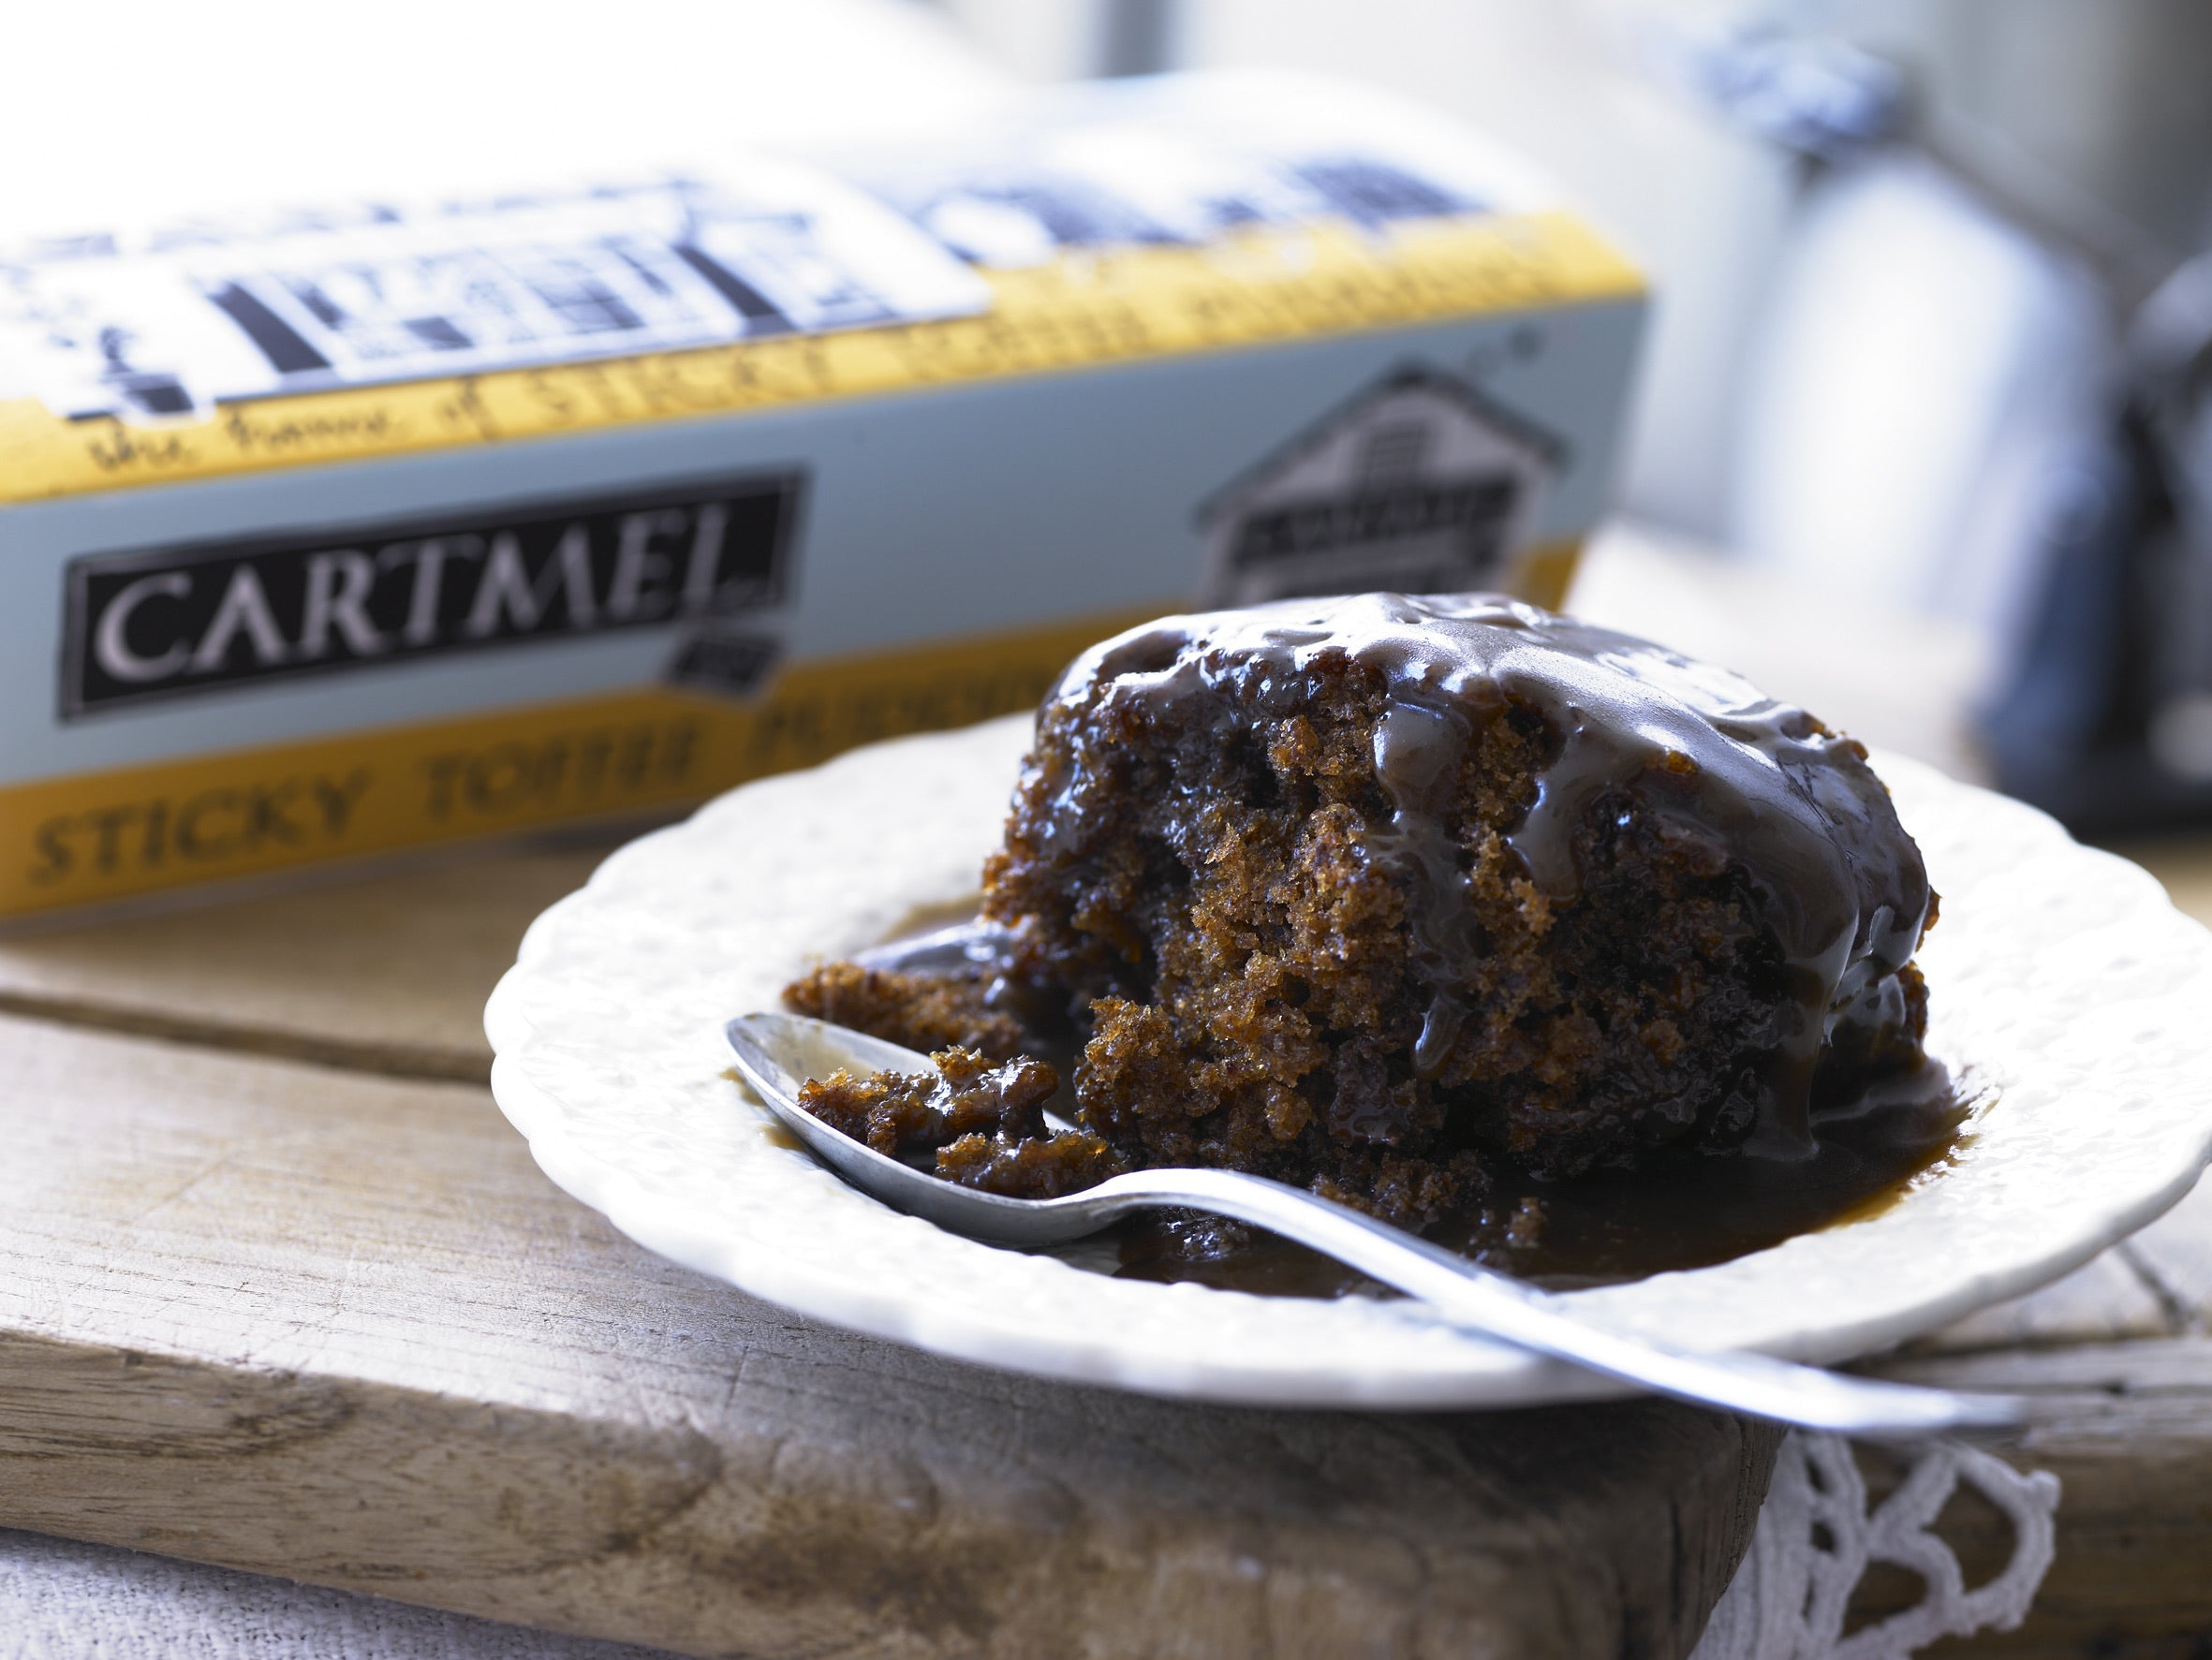 Stick Toffee Pudding, Family Size, Cartmel (2x500g)